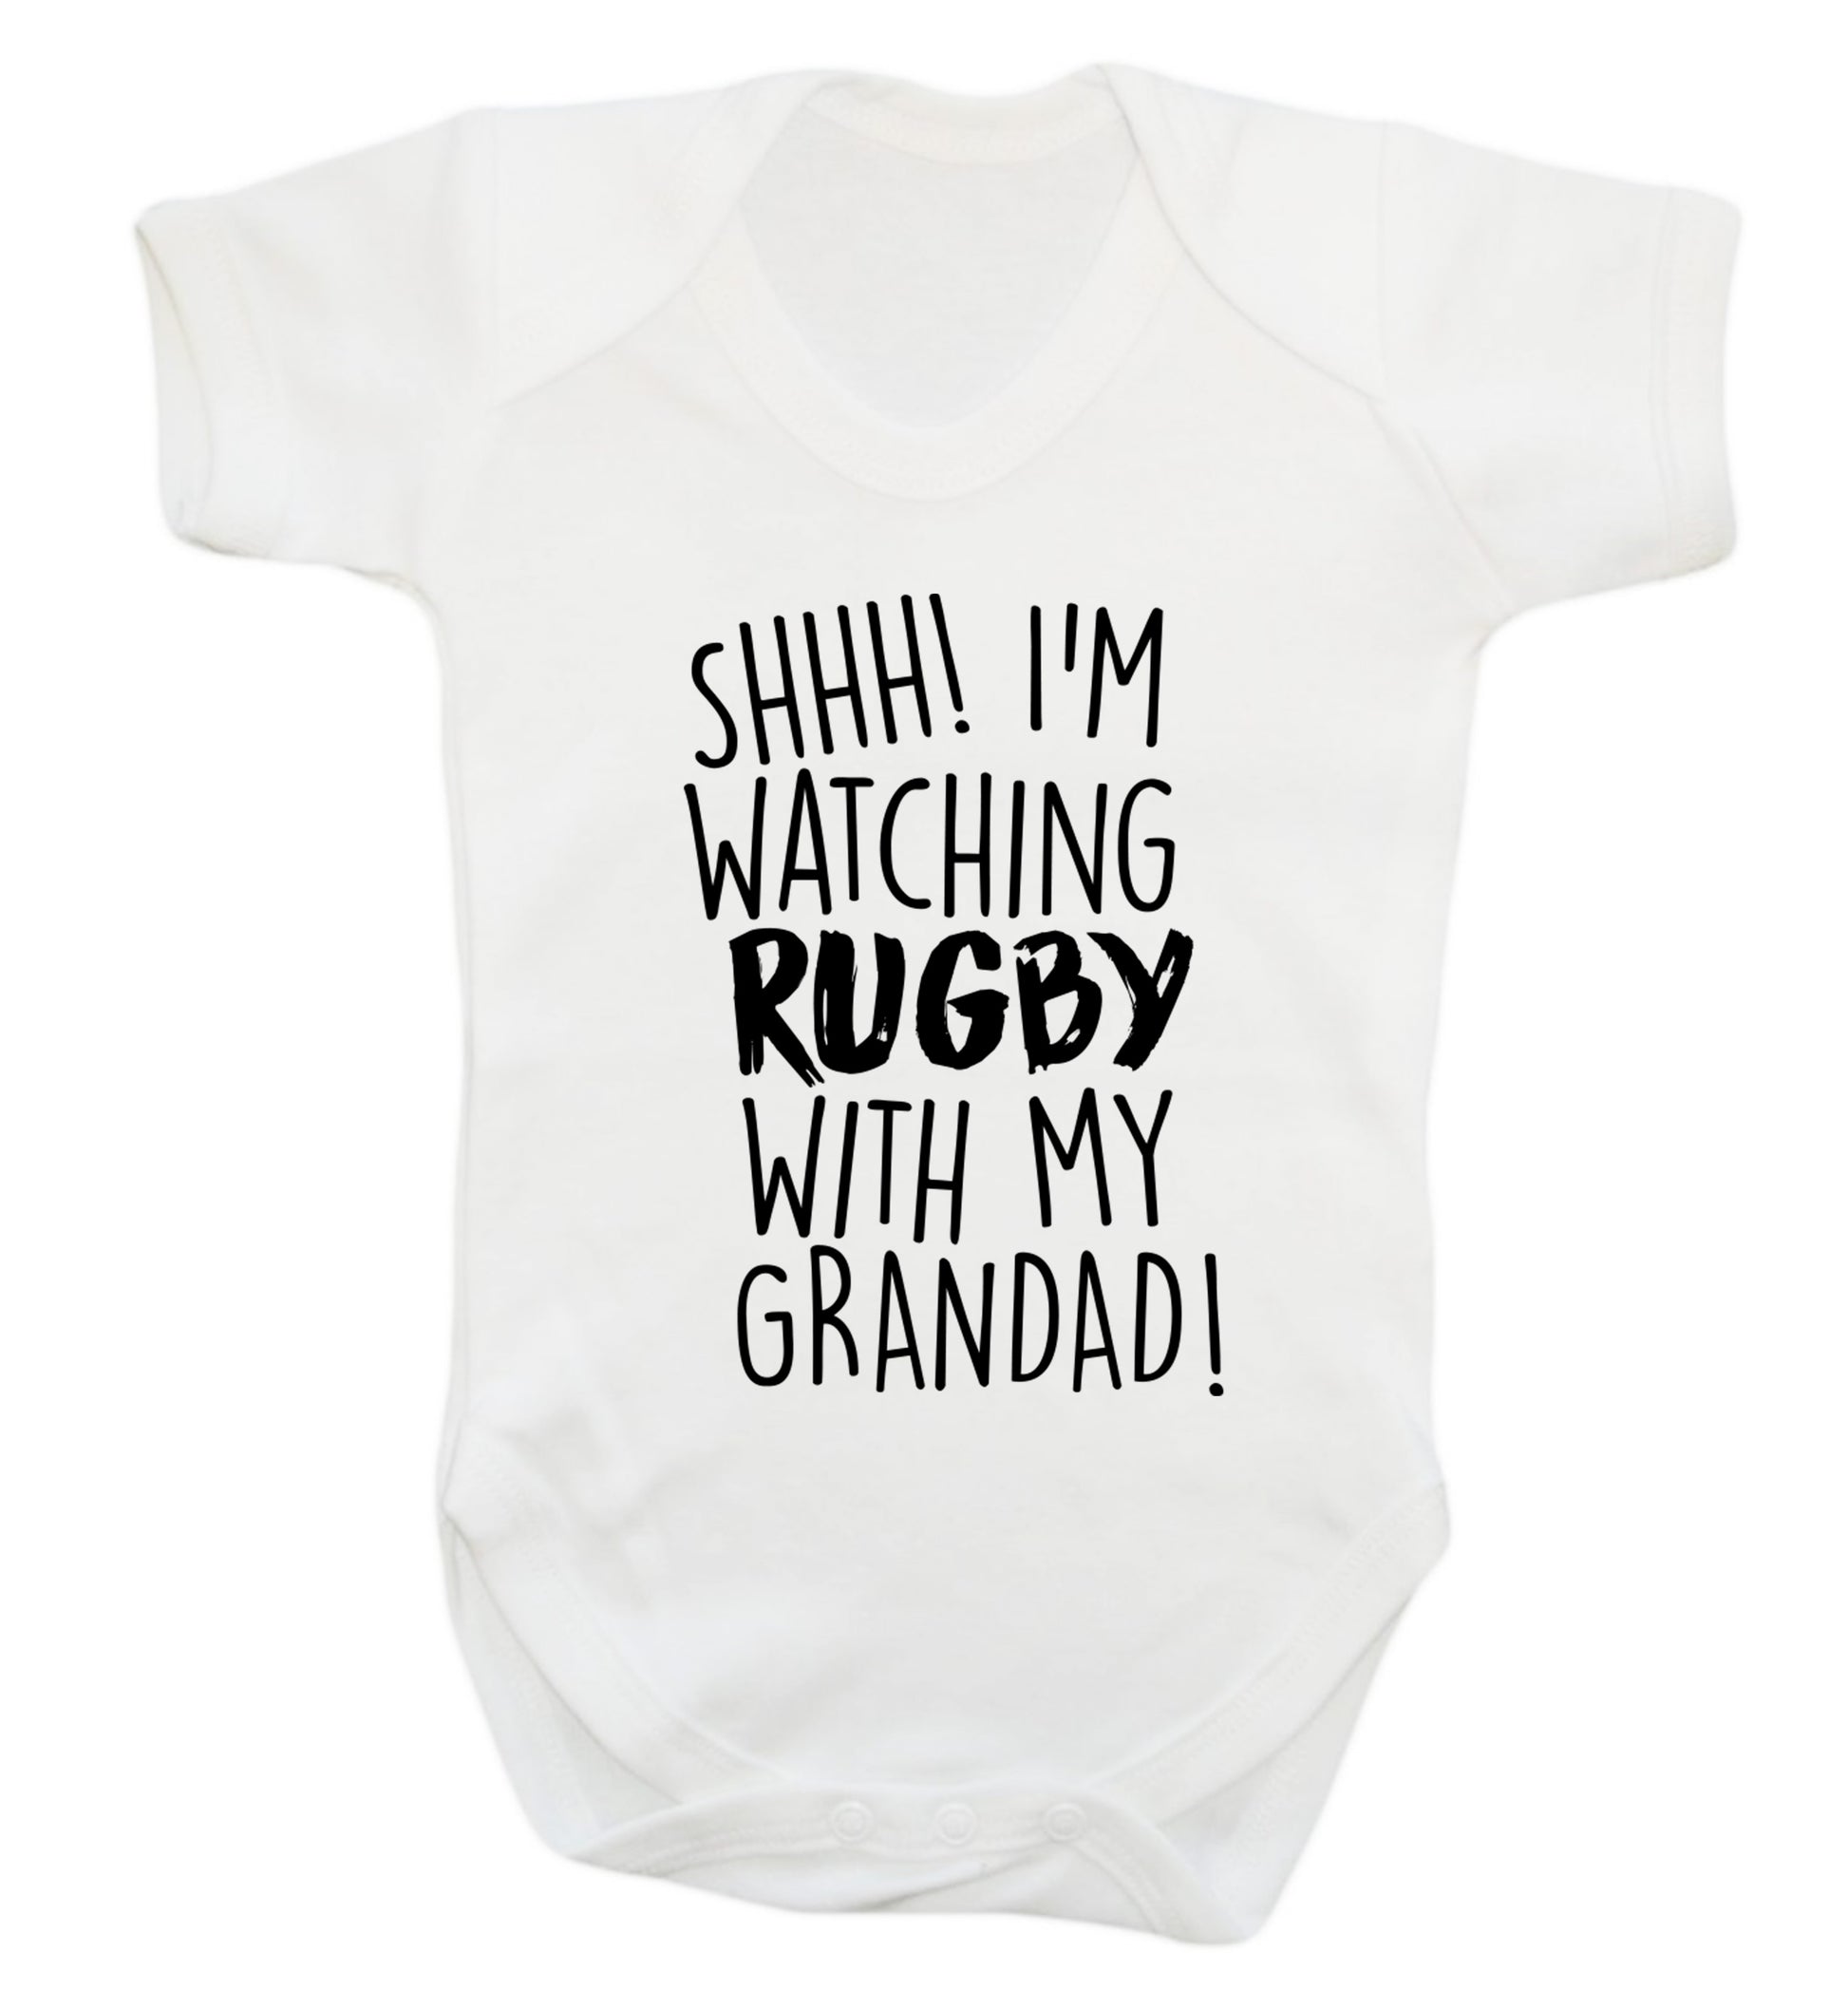 Shh I'm watching rugby with my grandaughter Baby Vest white 18-24 months